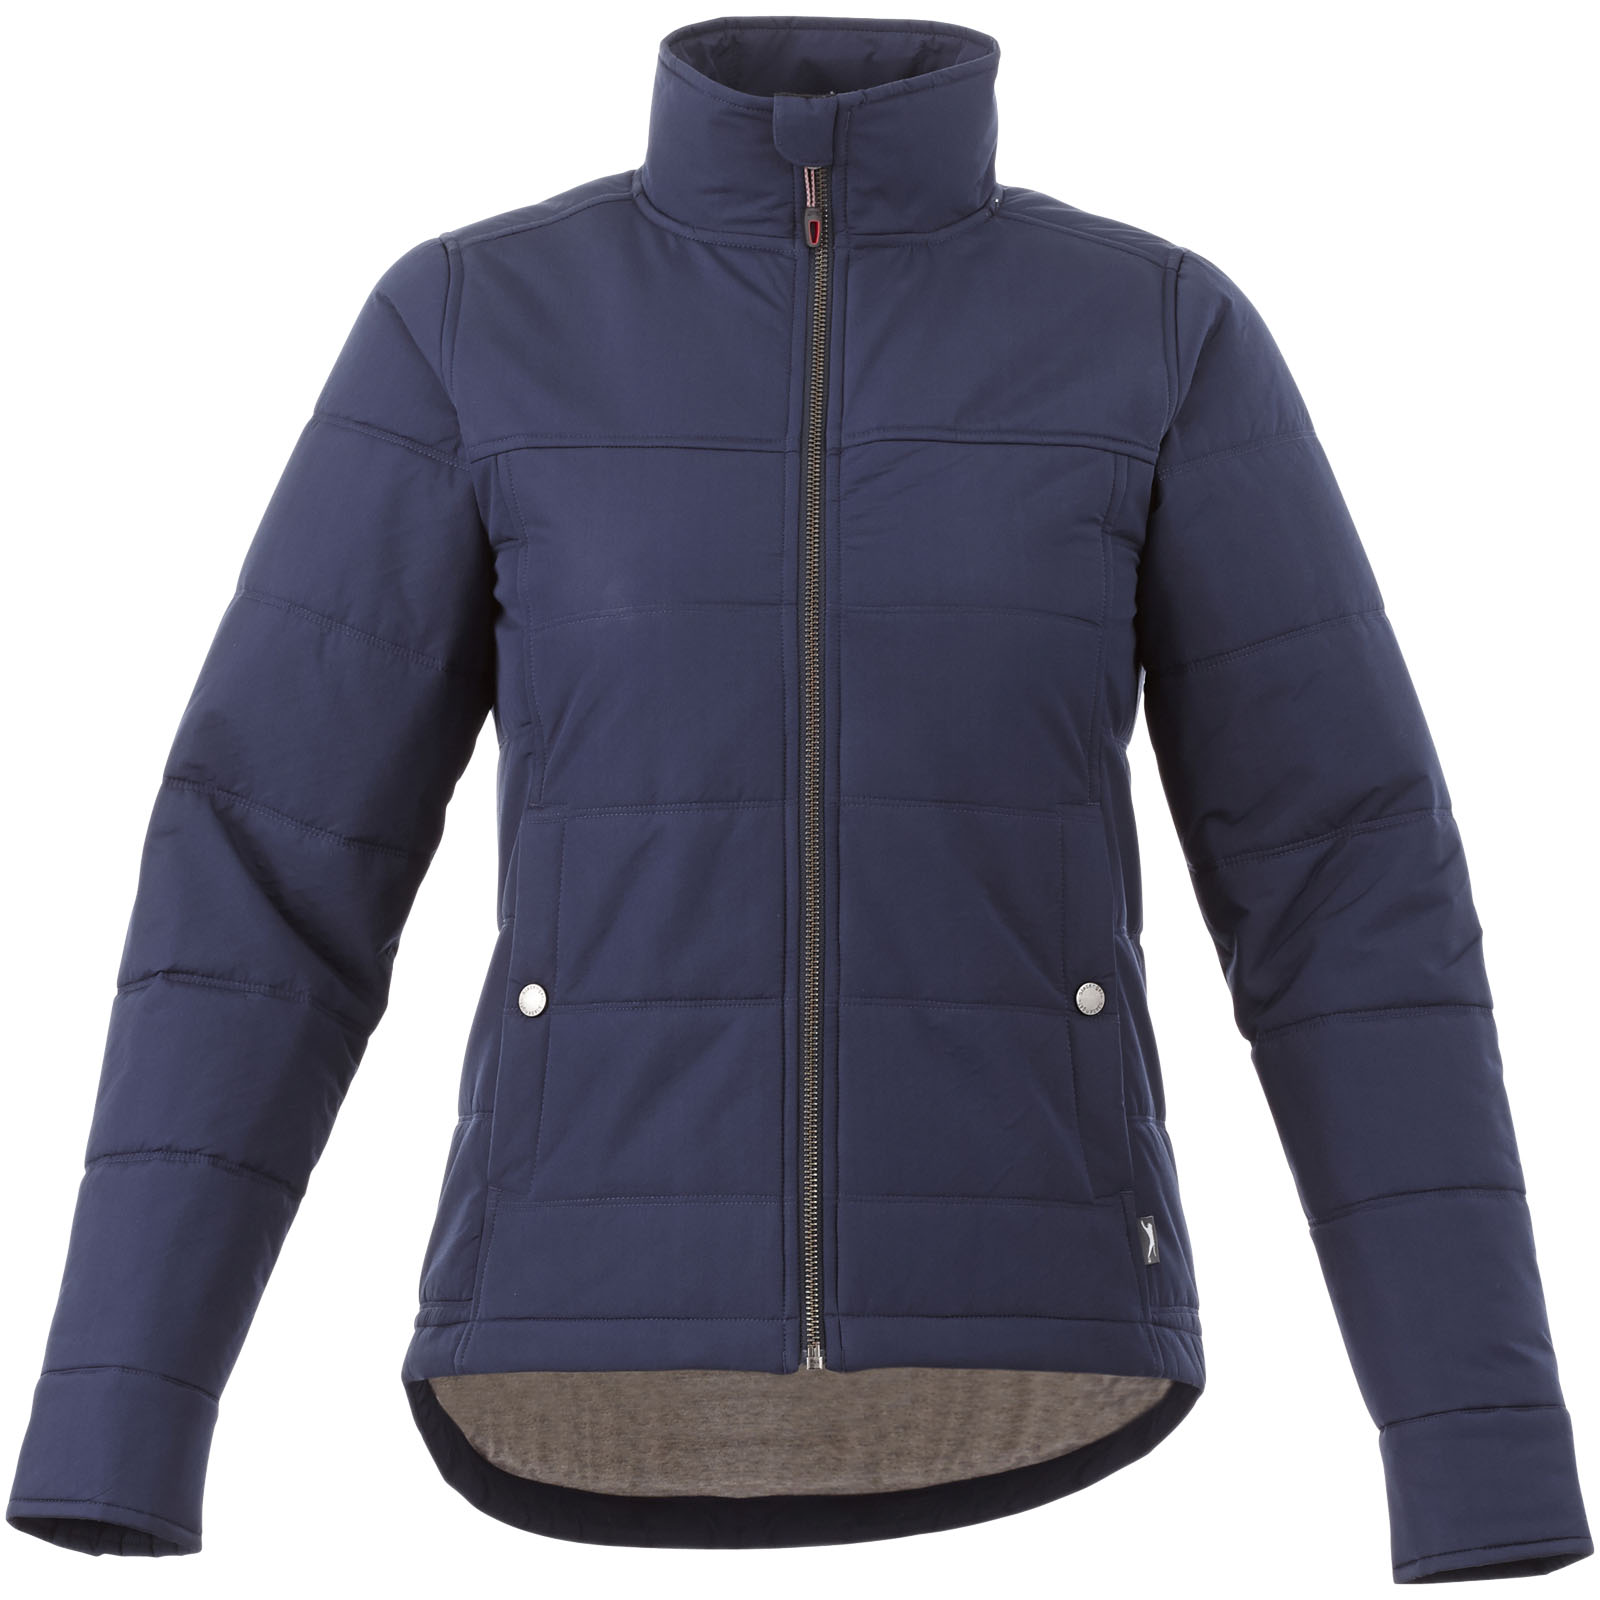 Bouncer insulated ladies jacket